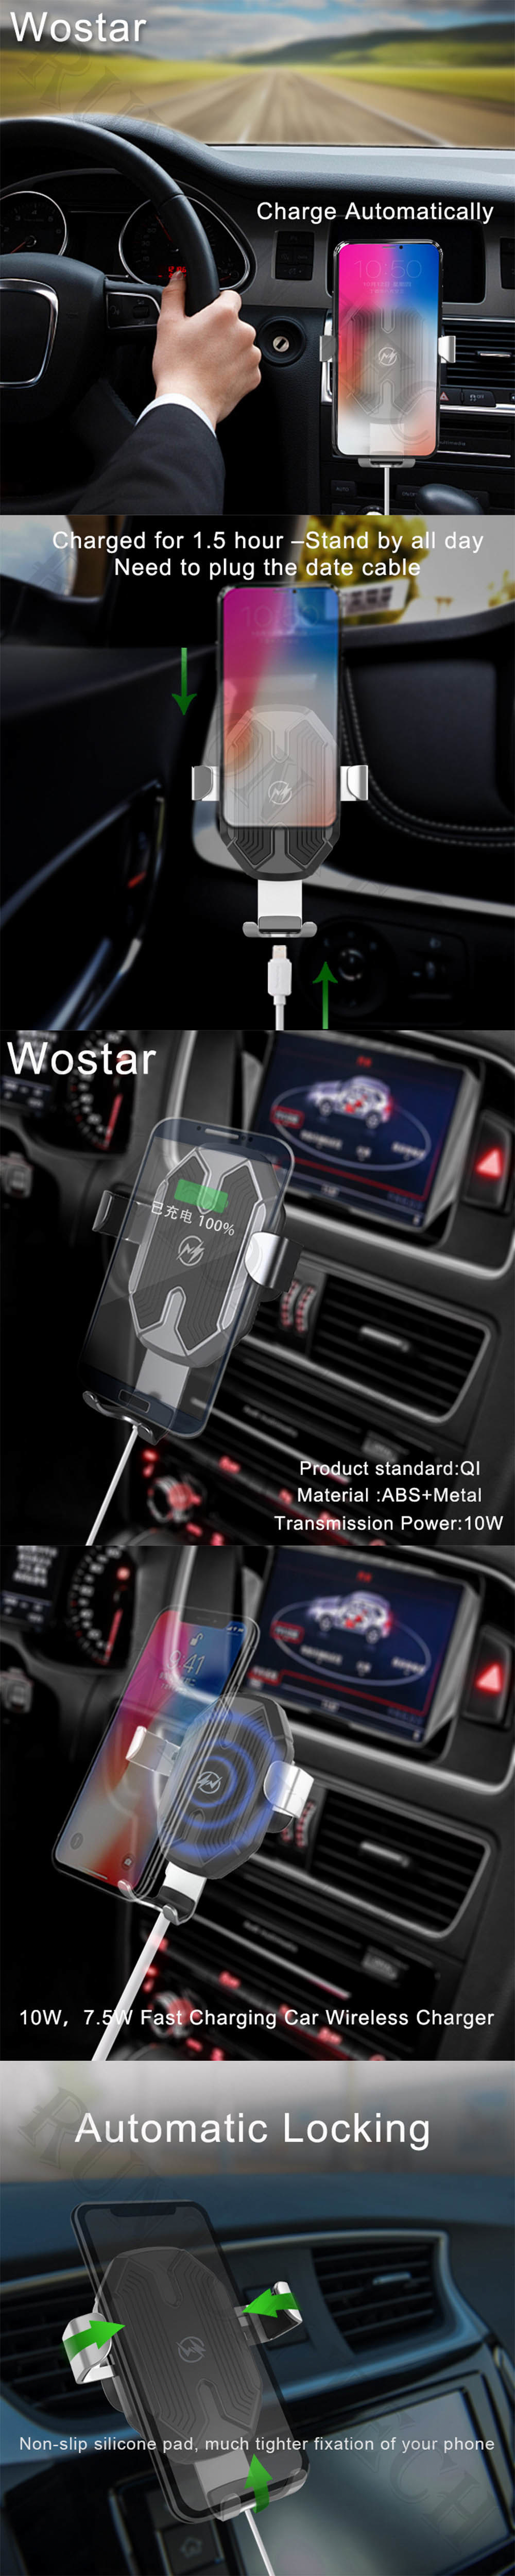 Wostar Car Charging Magnetic Mount Portable Phone Holder Fast Wireless Charger